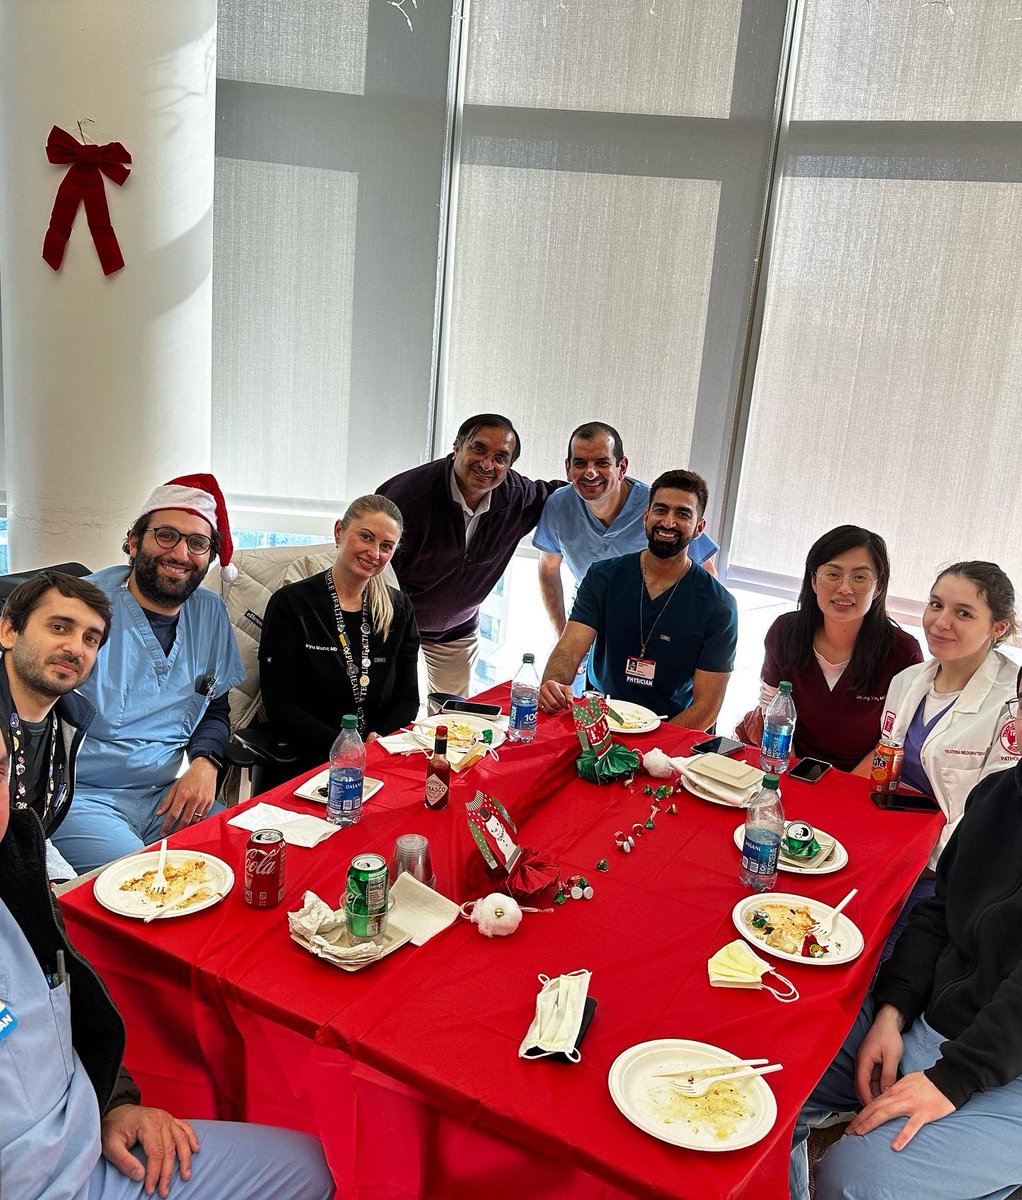 With holidays round the corner, I guess it’s just about the right time to post some family pics 🤗❤️

#workfam #PathTwitter